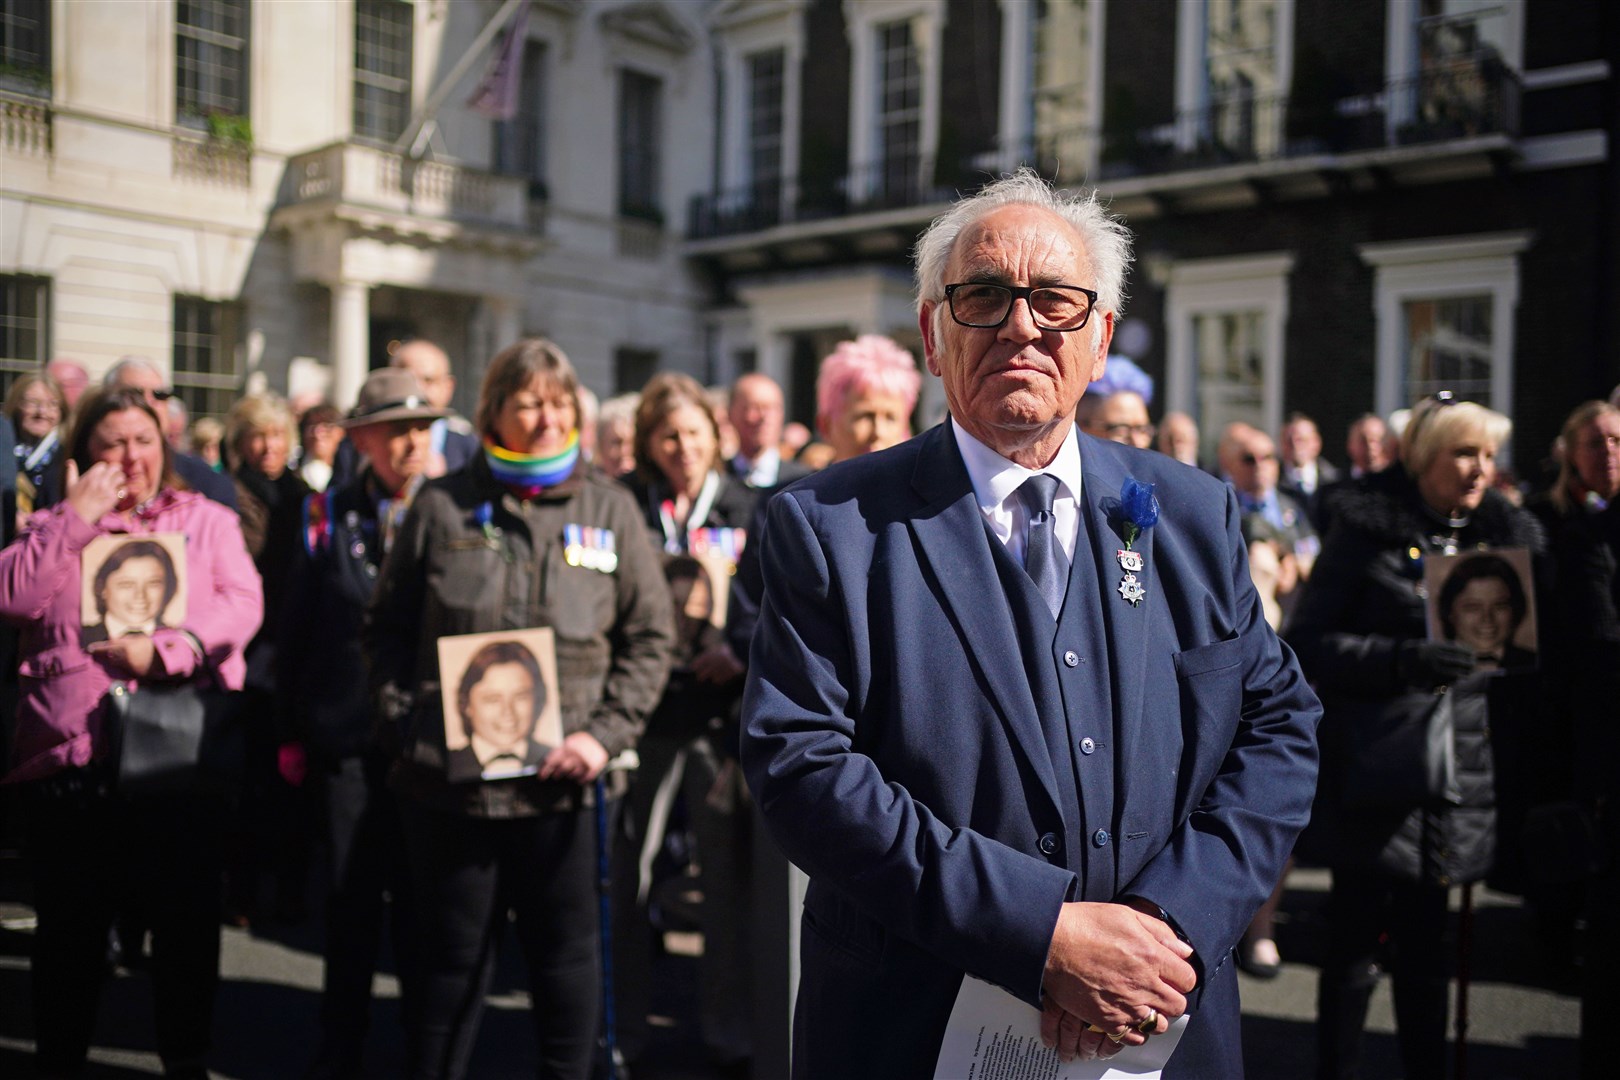 Retired police officer John Murray, who was on duty with Pc Yvonne Fletcher when she was shot, attends the 40th anniversary memorial service (Victoria Jones/PA)